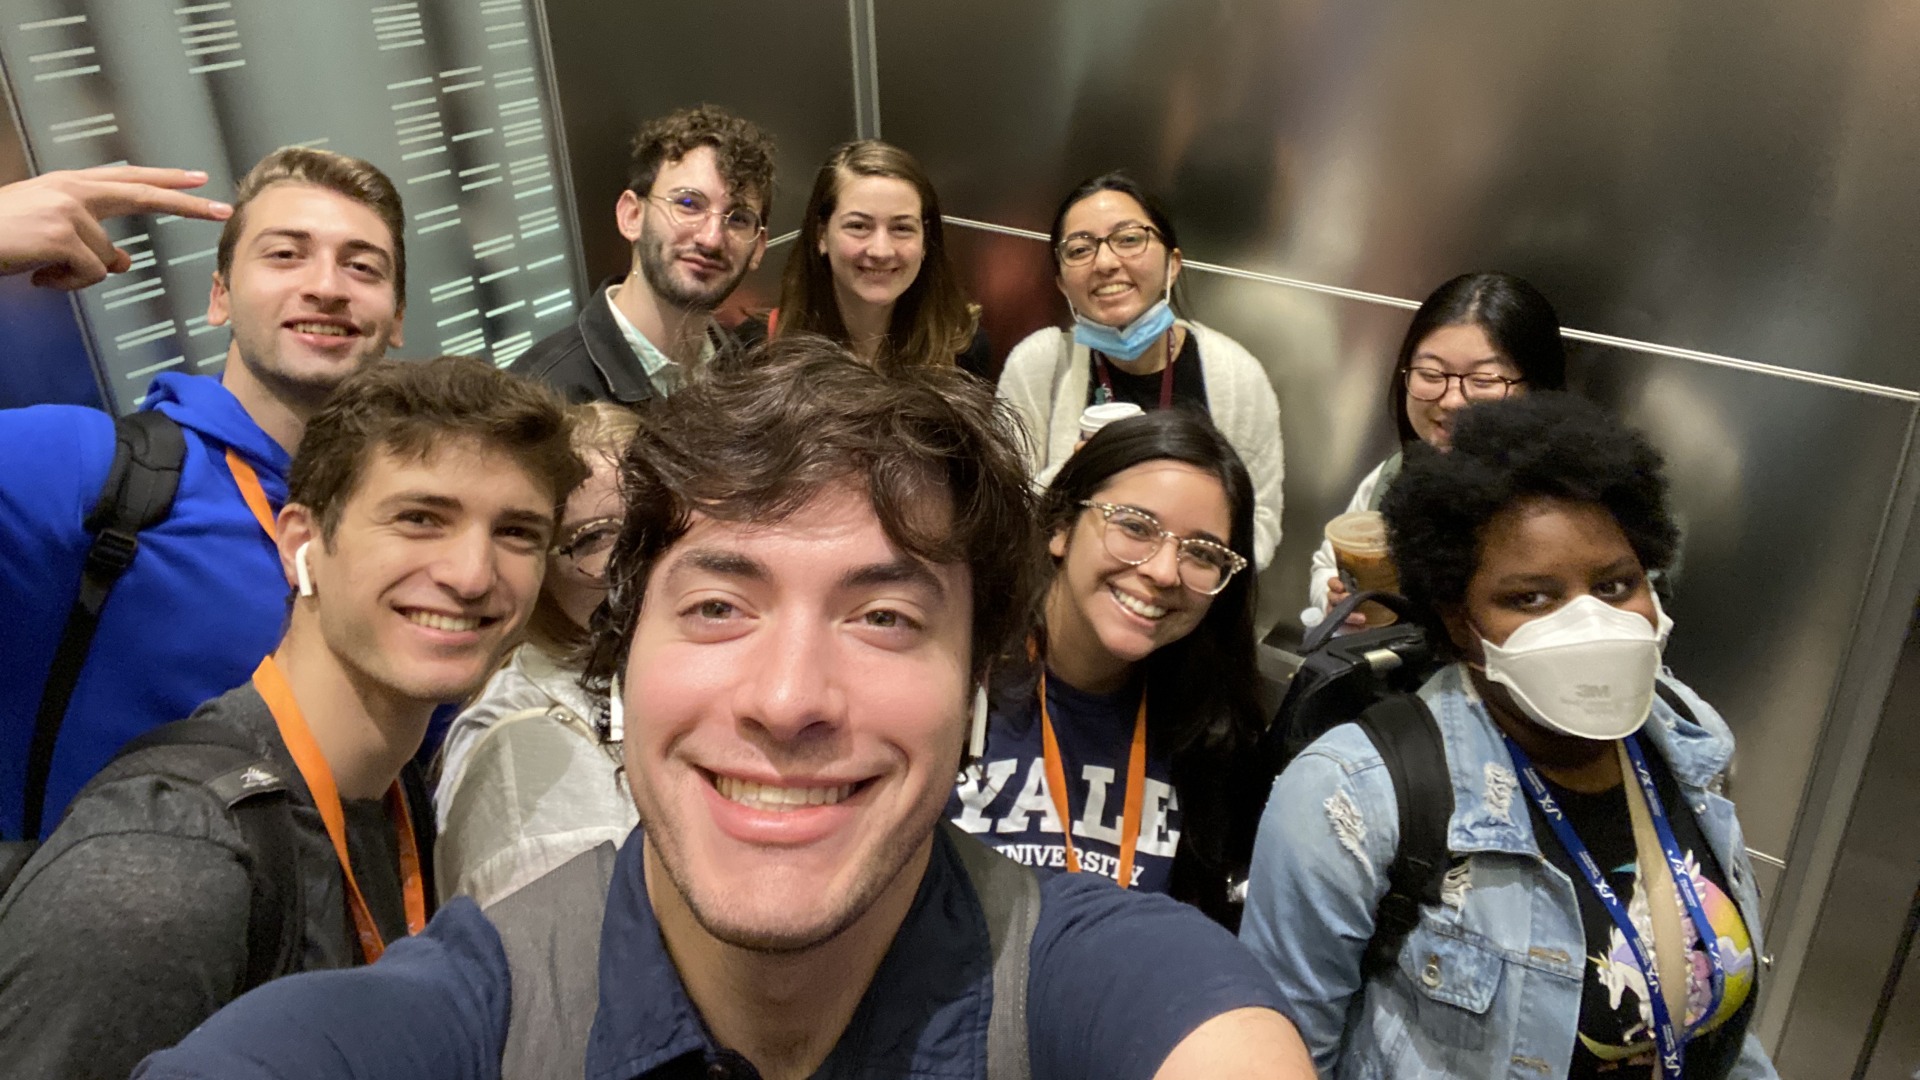 Me and my research colleagues smiling in the building elevator together